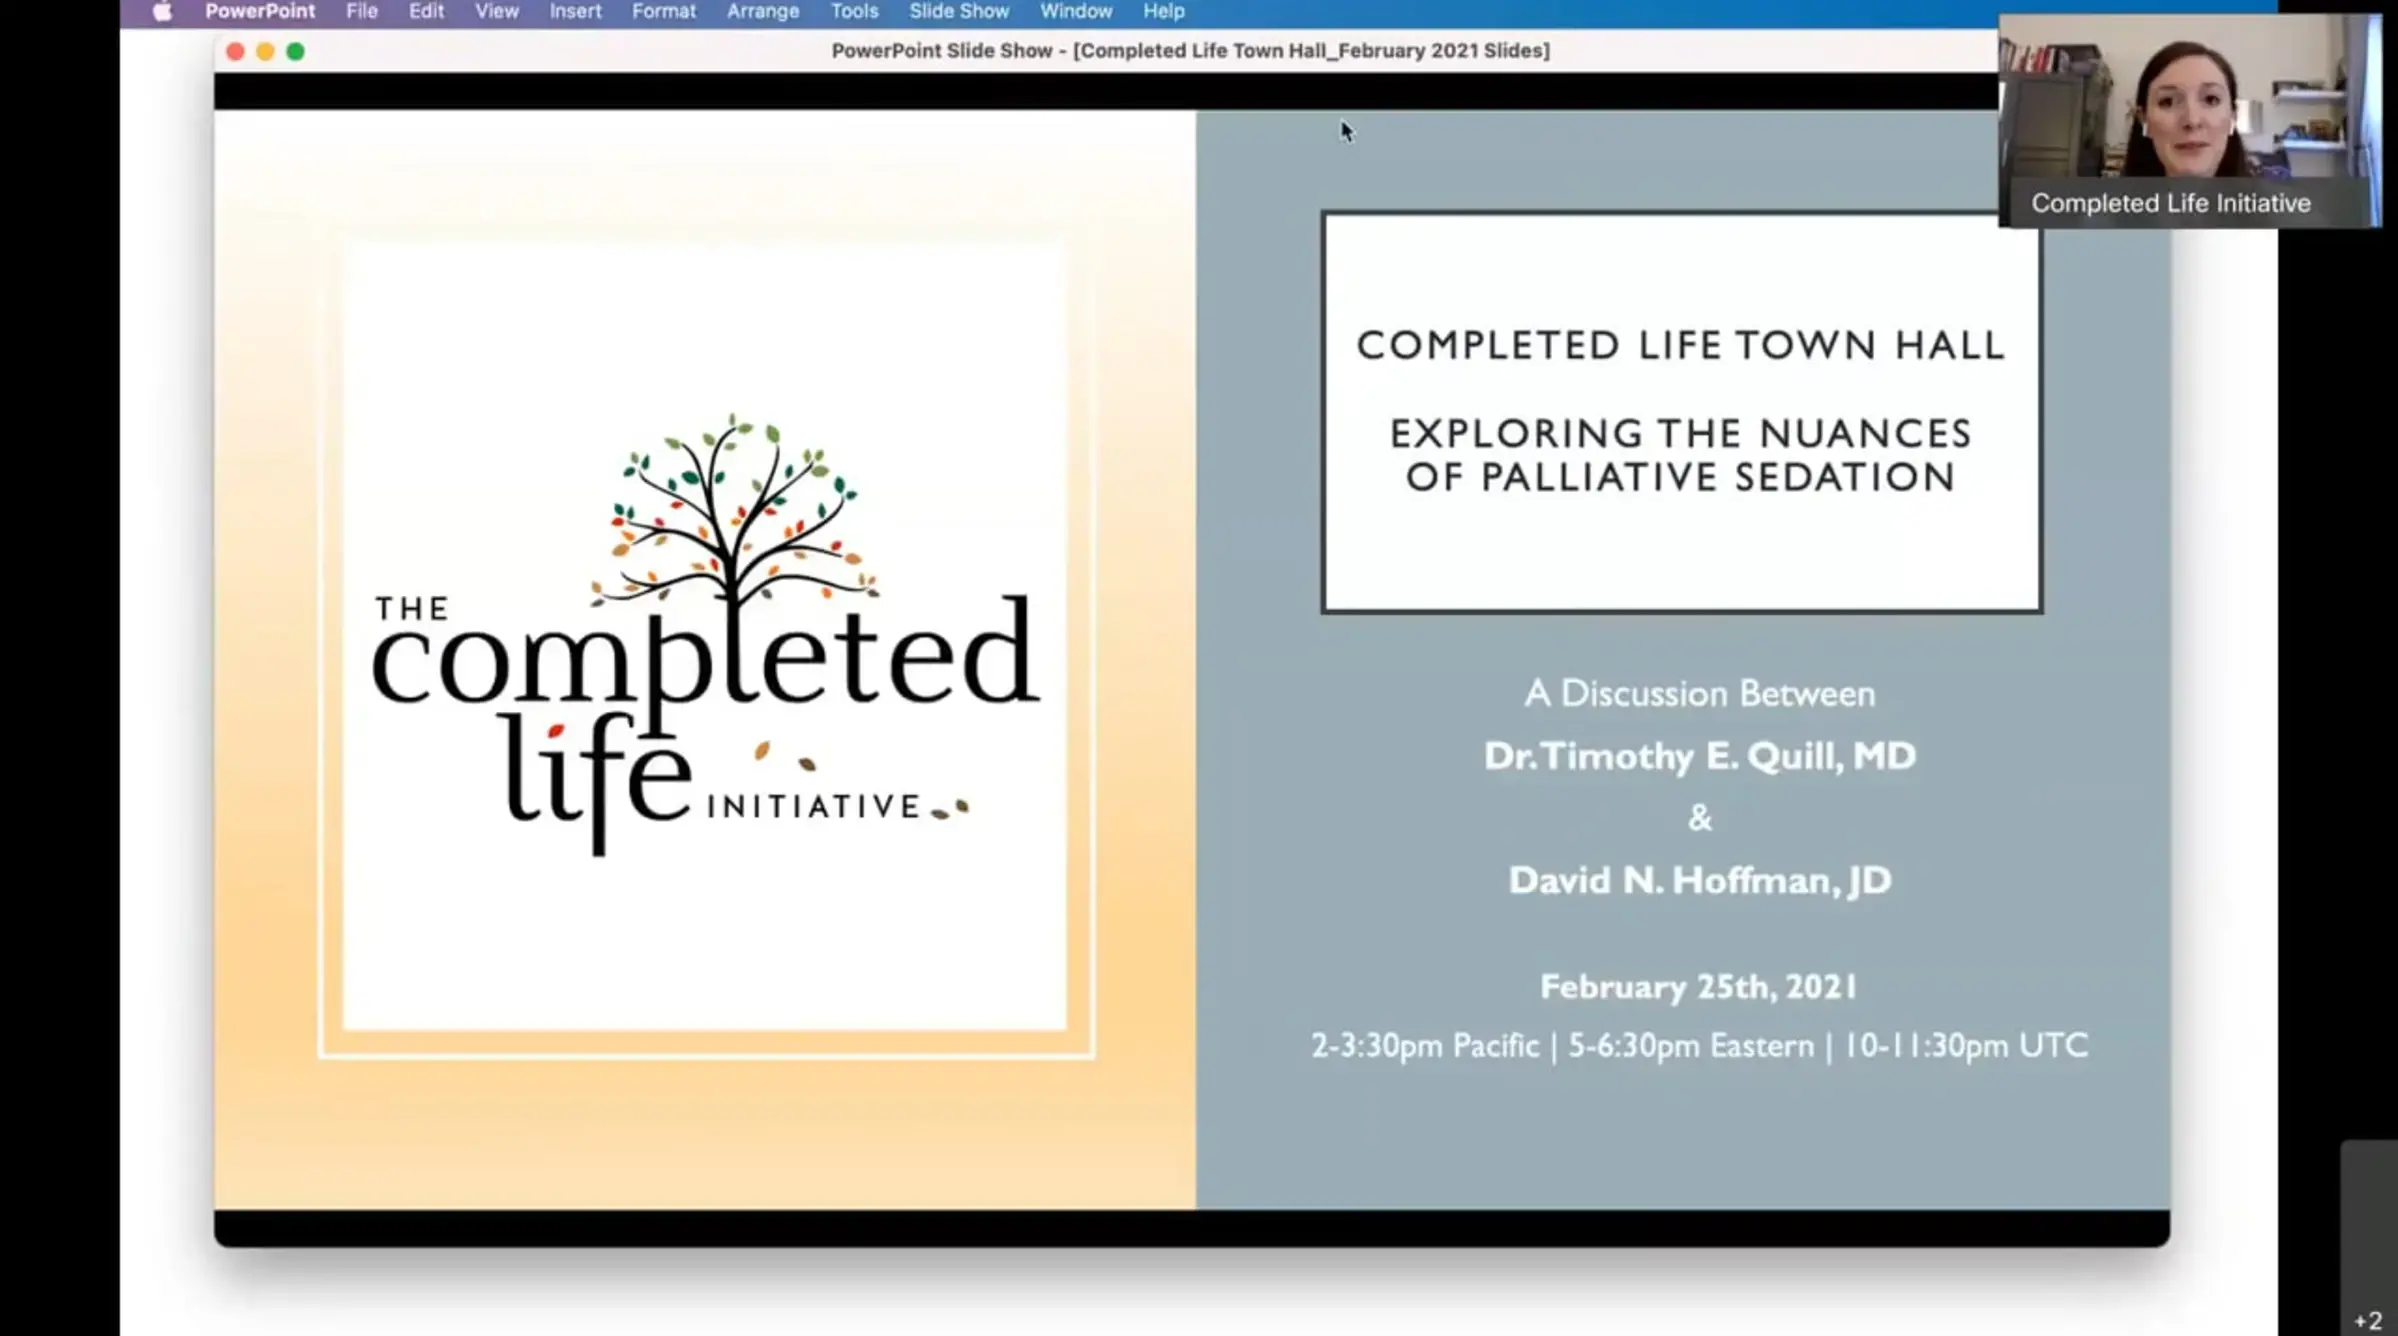 Completed Life February Town Hall on Palliative Sedation, February 25th, 2021